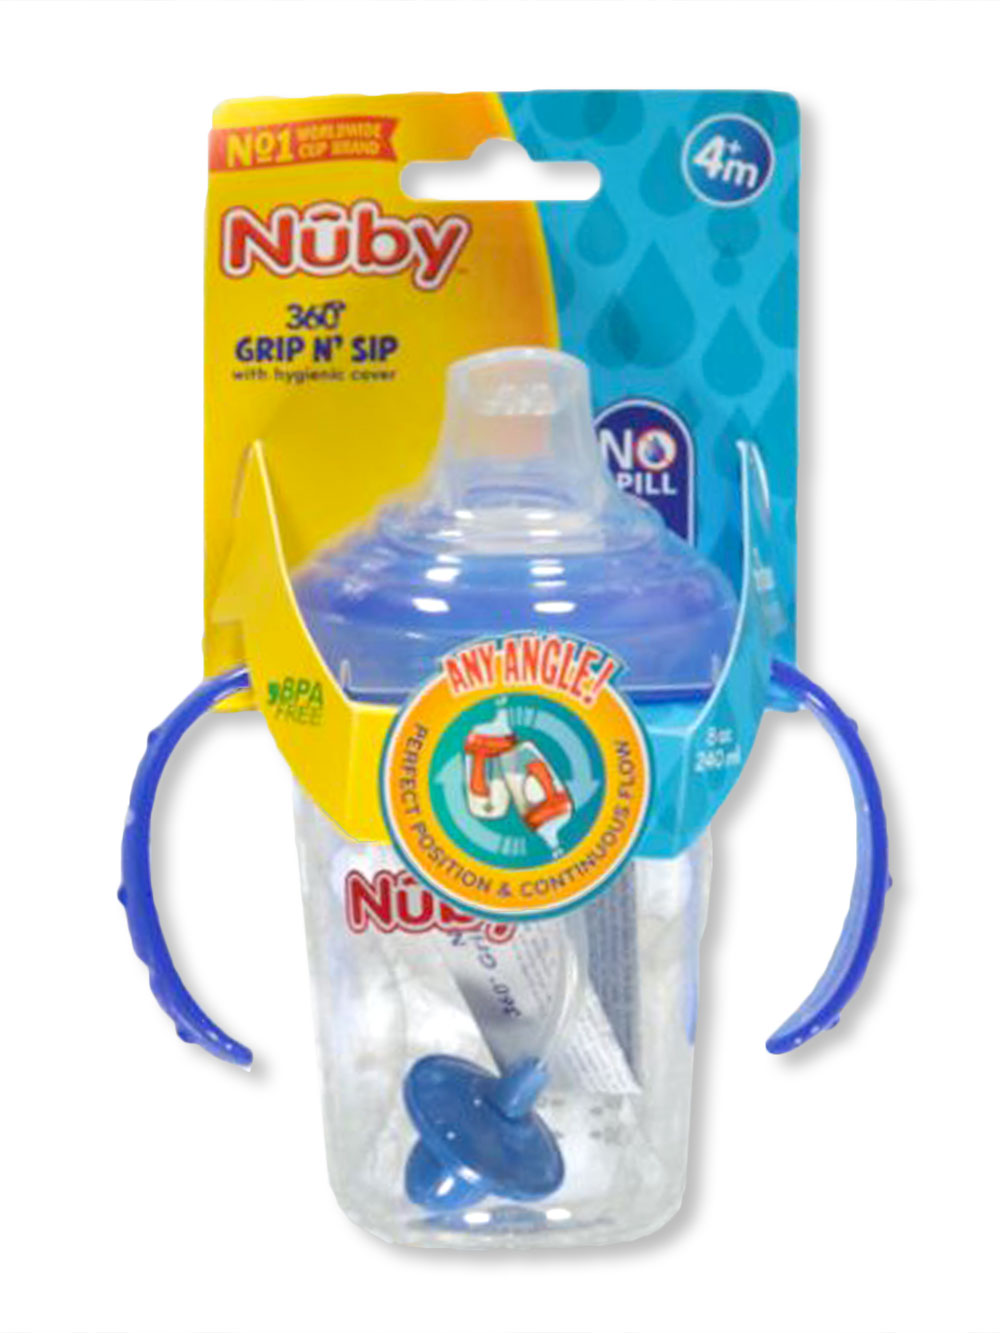 Nuby Sipeez Clik It Grip N Sip No Spill Cups Pack of 2 Pink and Aqua